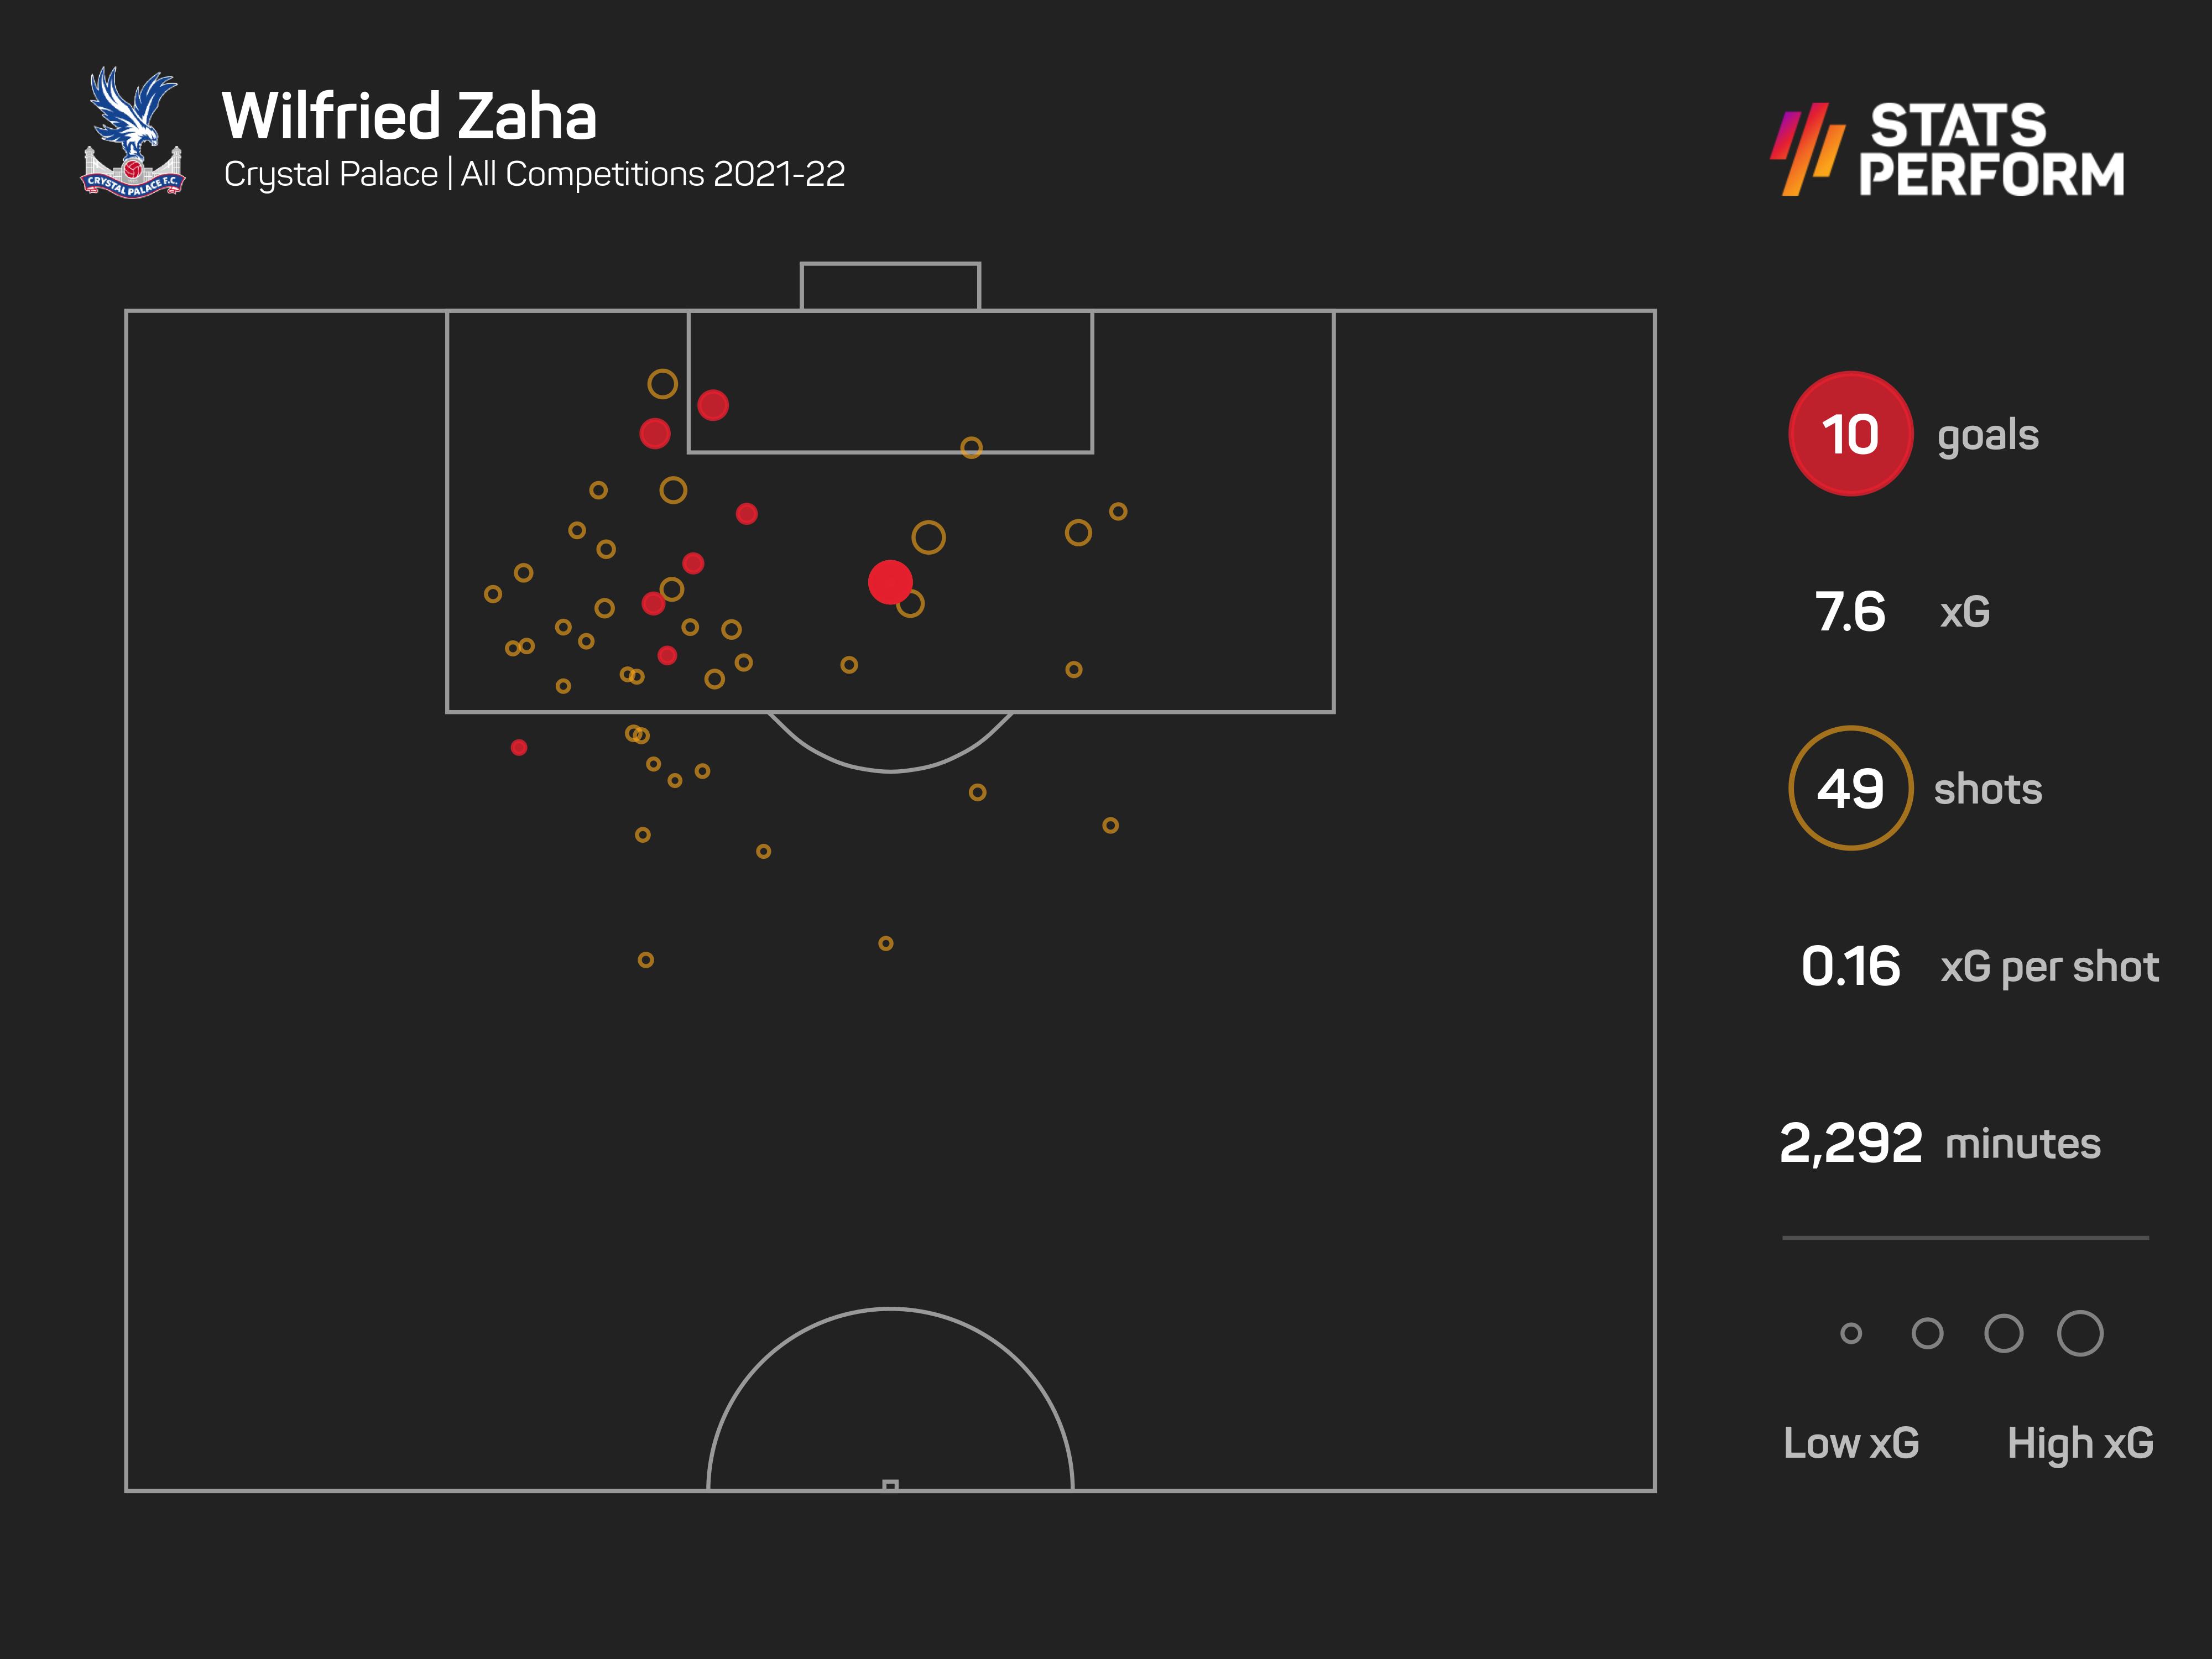 Wilfried Zaha has been excellent again this season